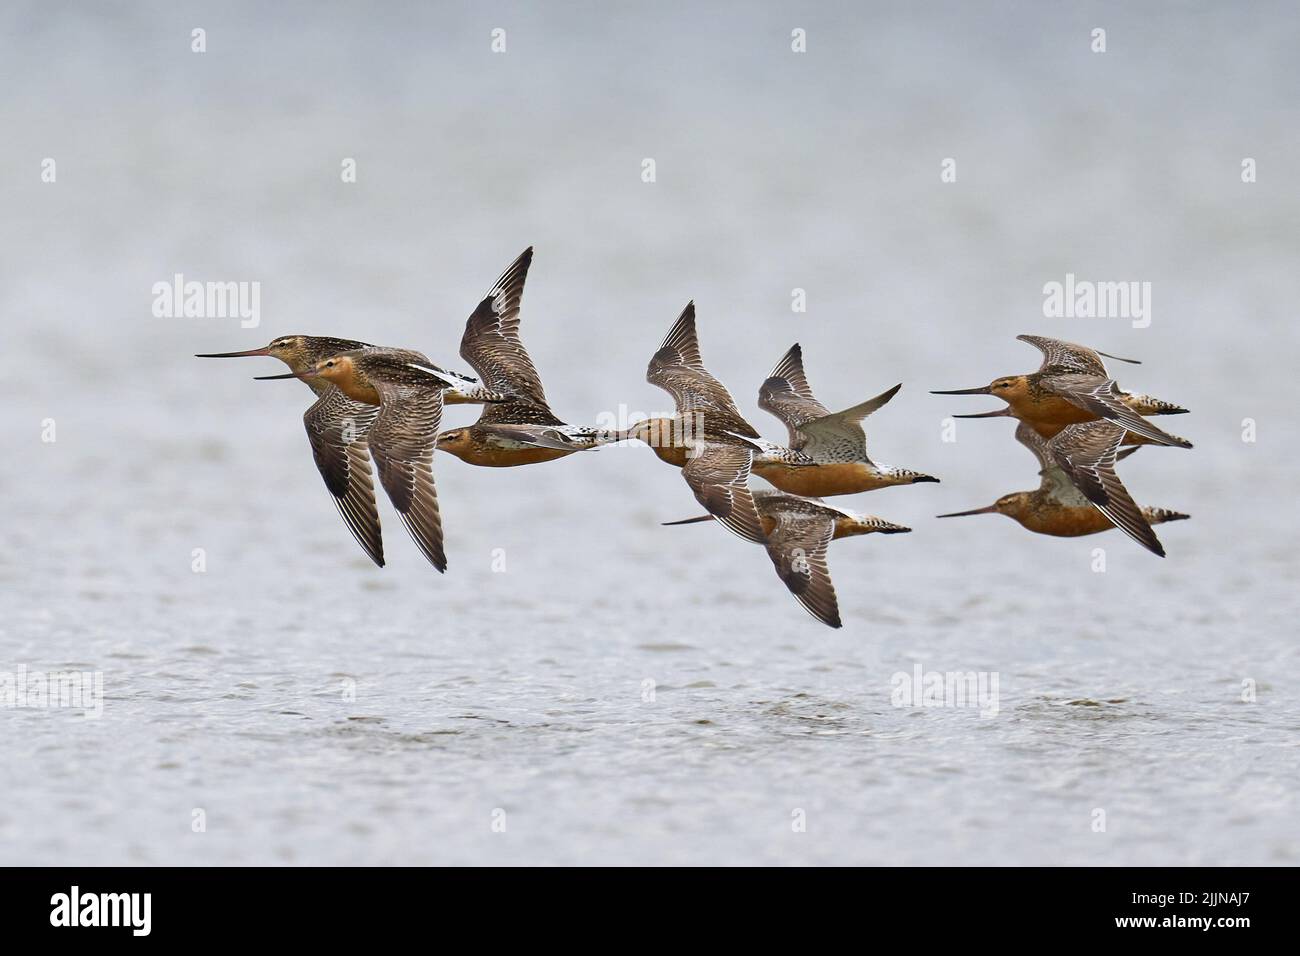 Bar-tailed godwits (Limosa lapponica) in flight Stock Photo